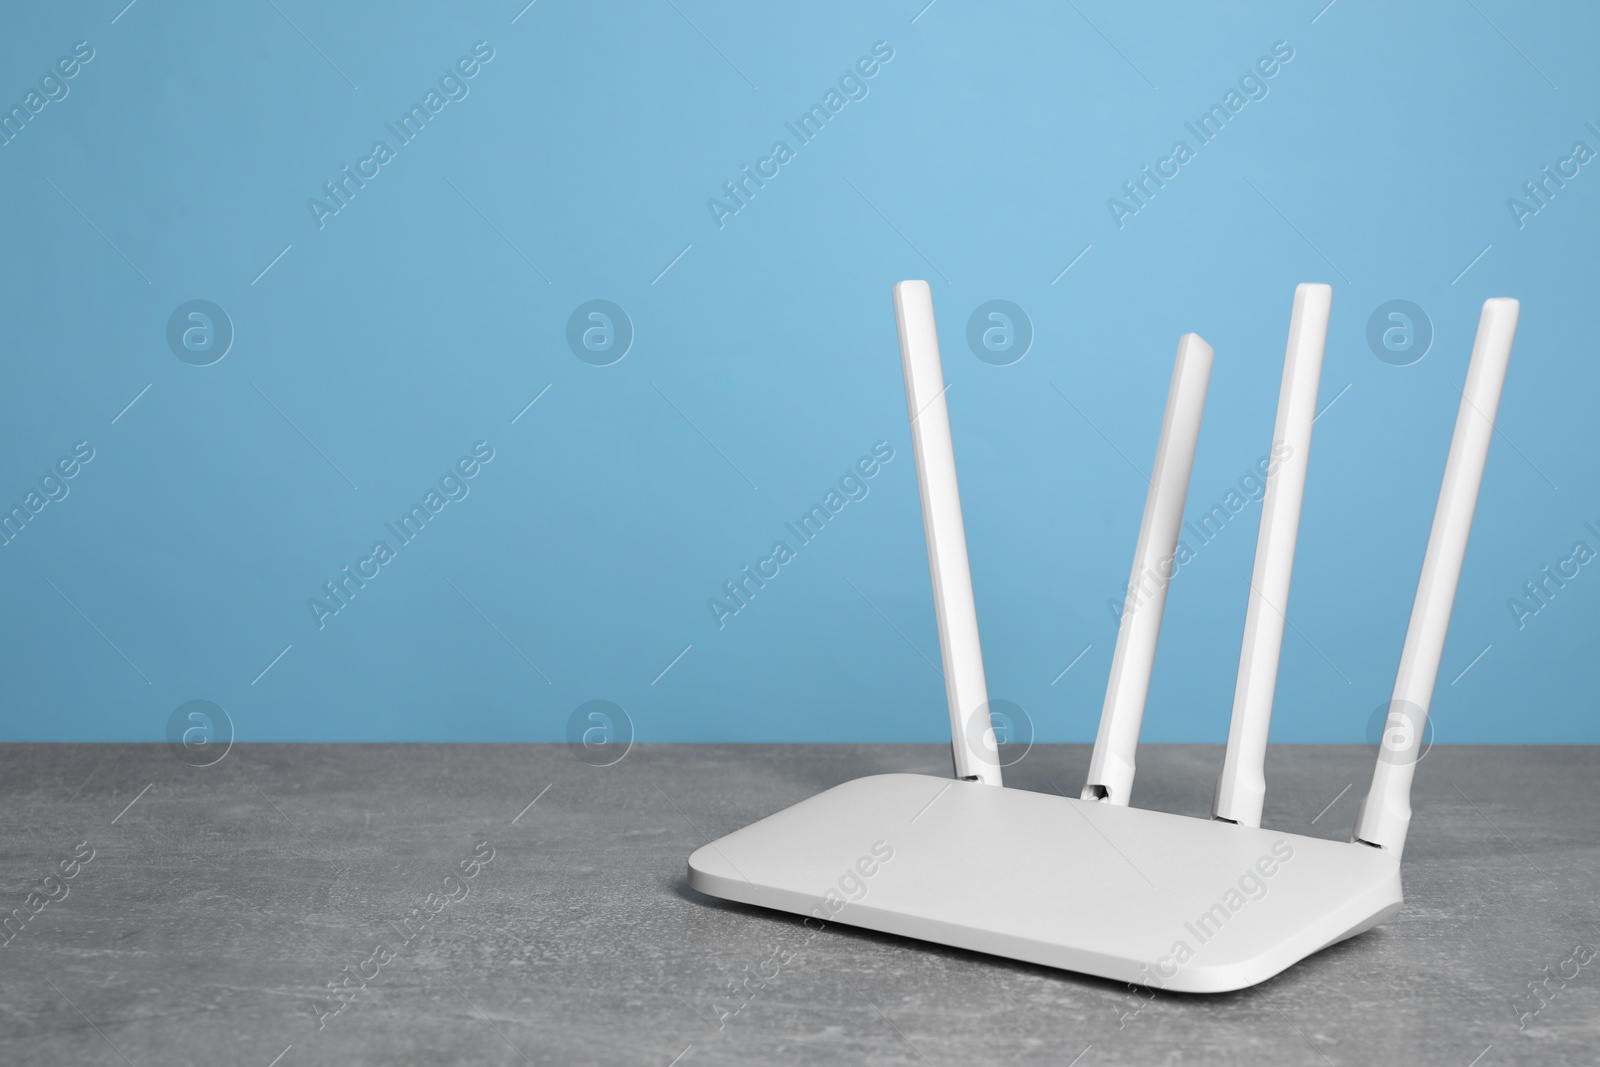 Photo of New white Wi-Fi router on grey textured table against light blue background. Space for text